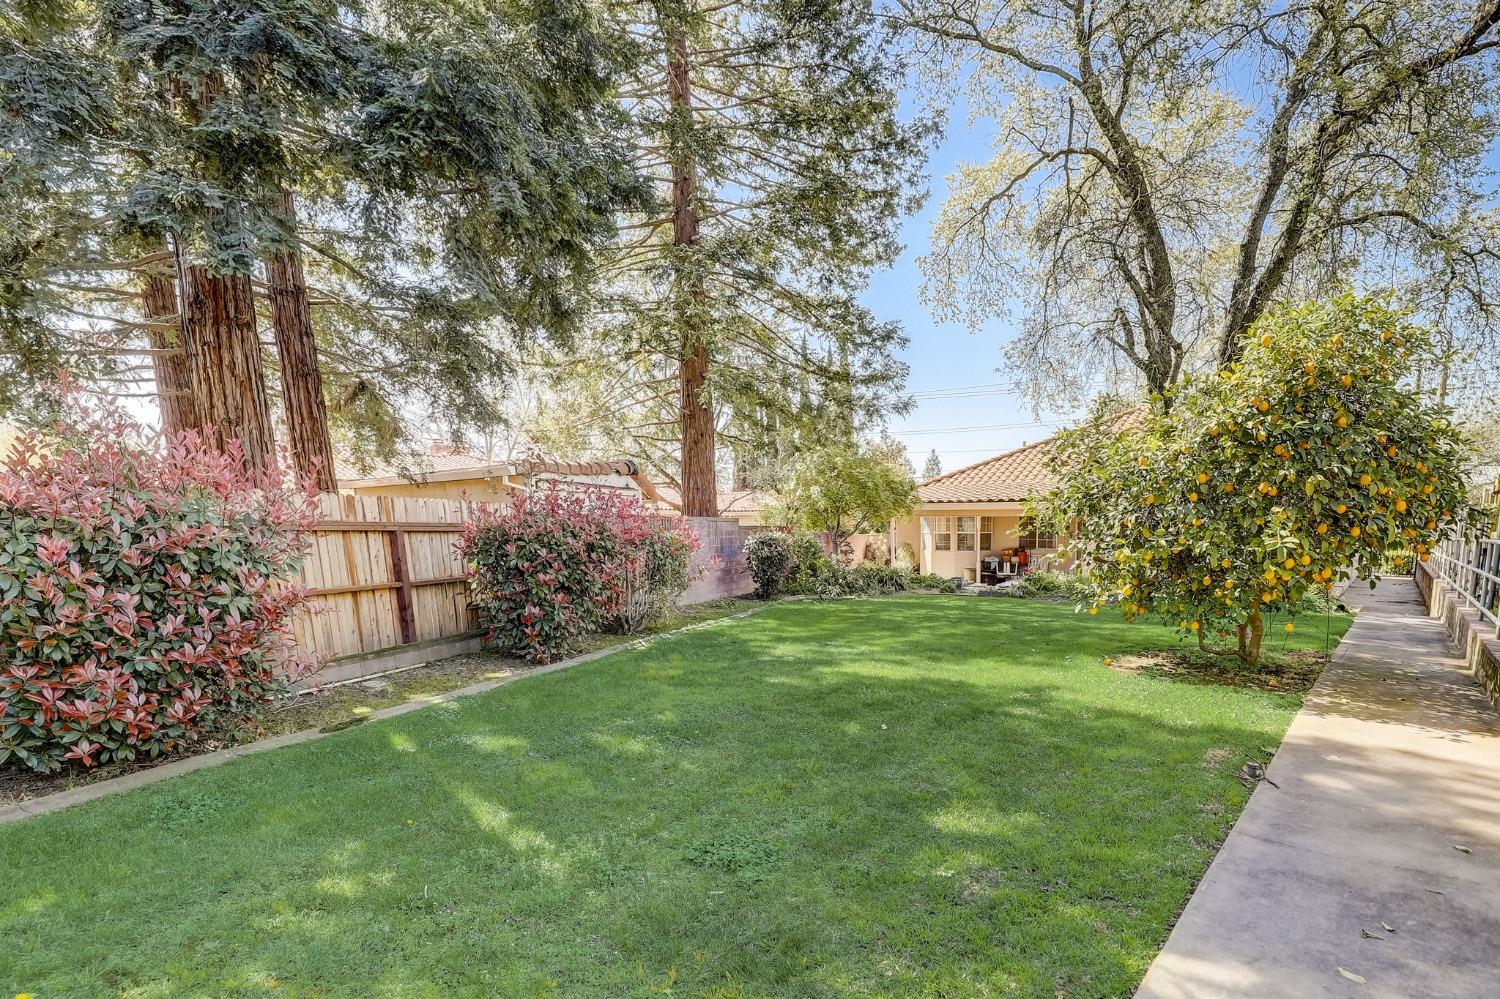 Photo of 4150 Garfield Ave in Carmichael, CA